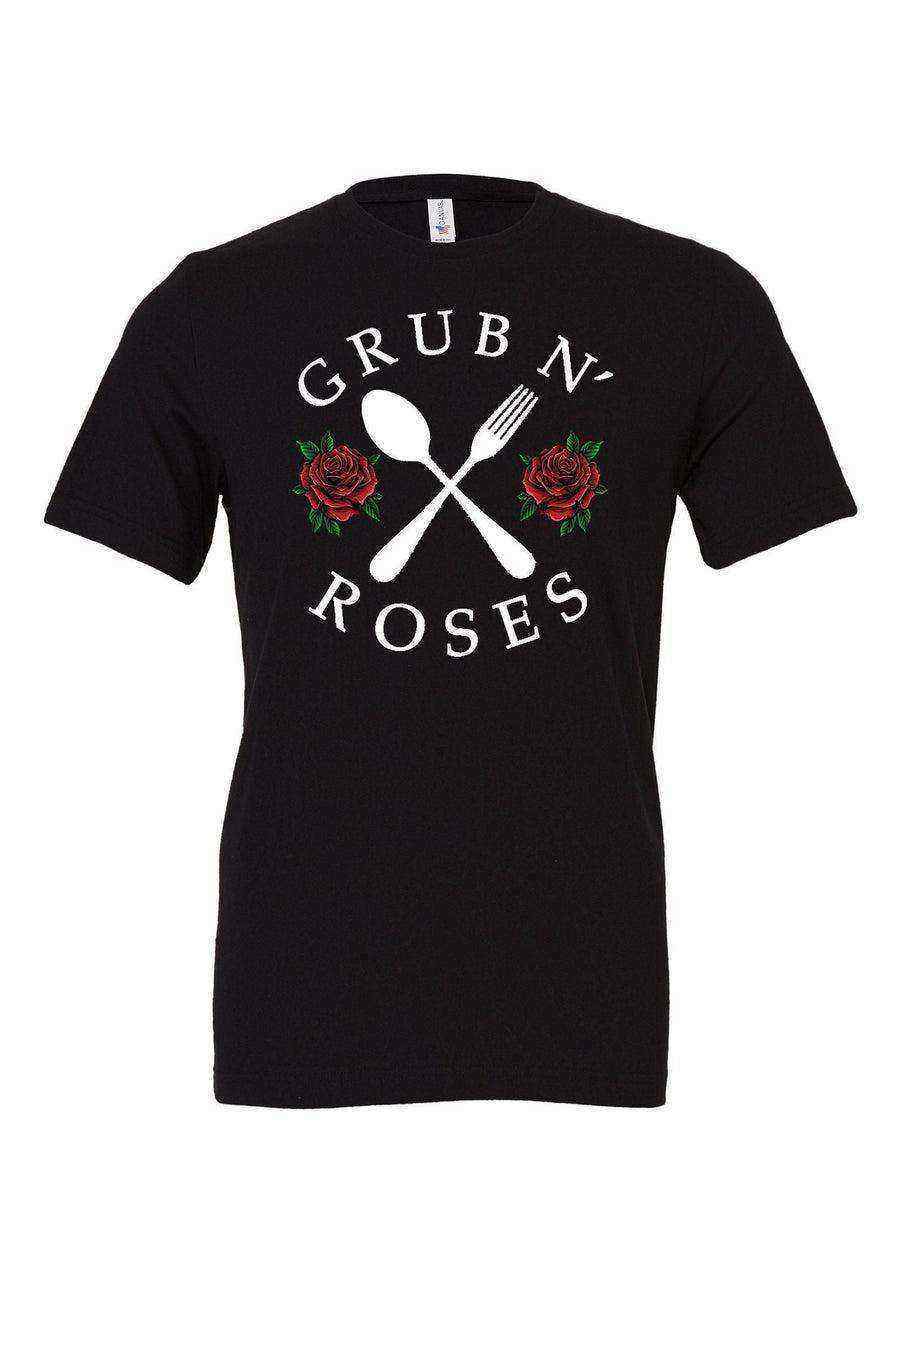 Youth | Grub N Roses Shirt | Epcot Flower And Garden Festival - Dylan's Tees